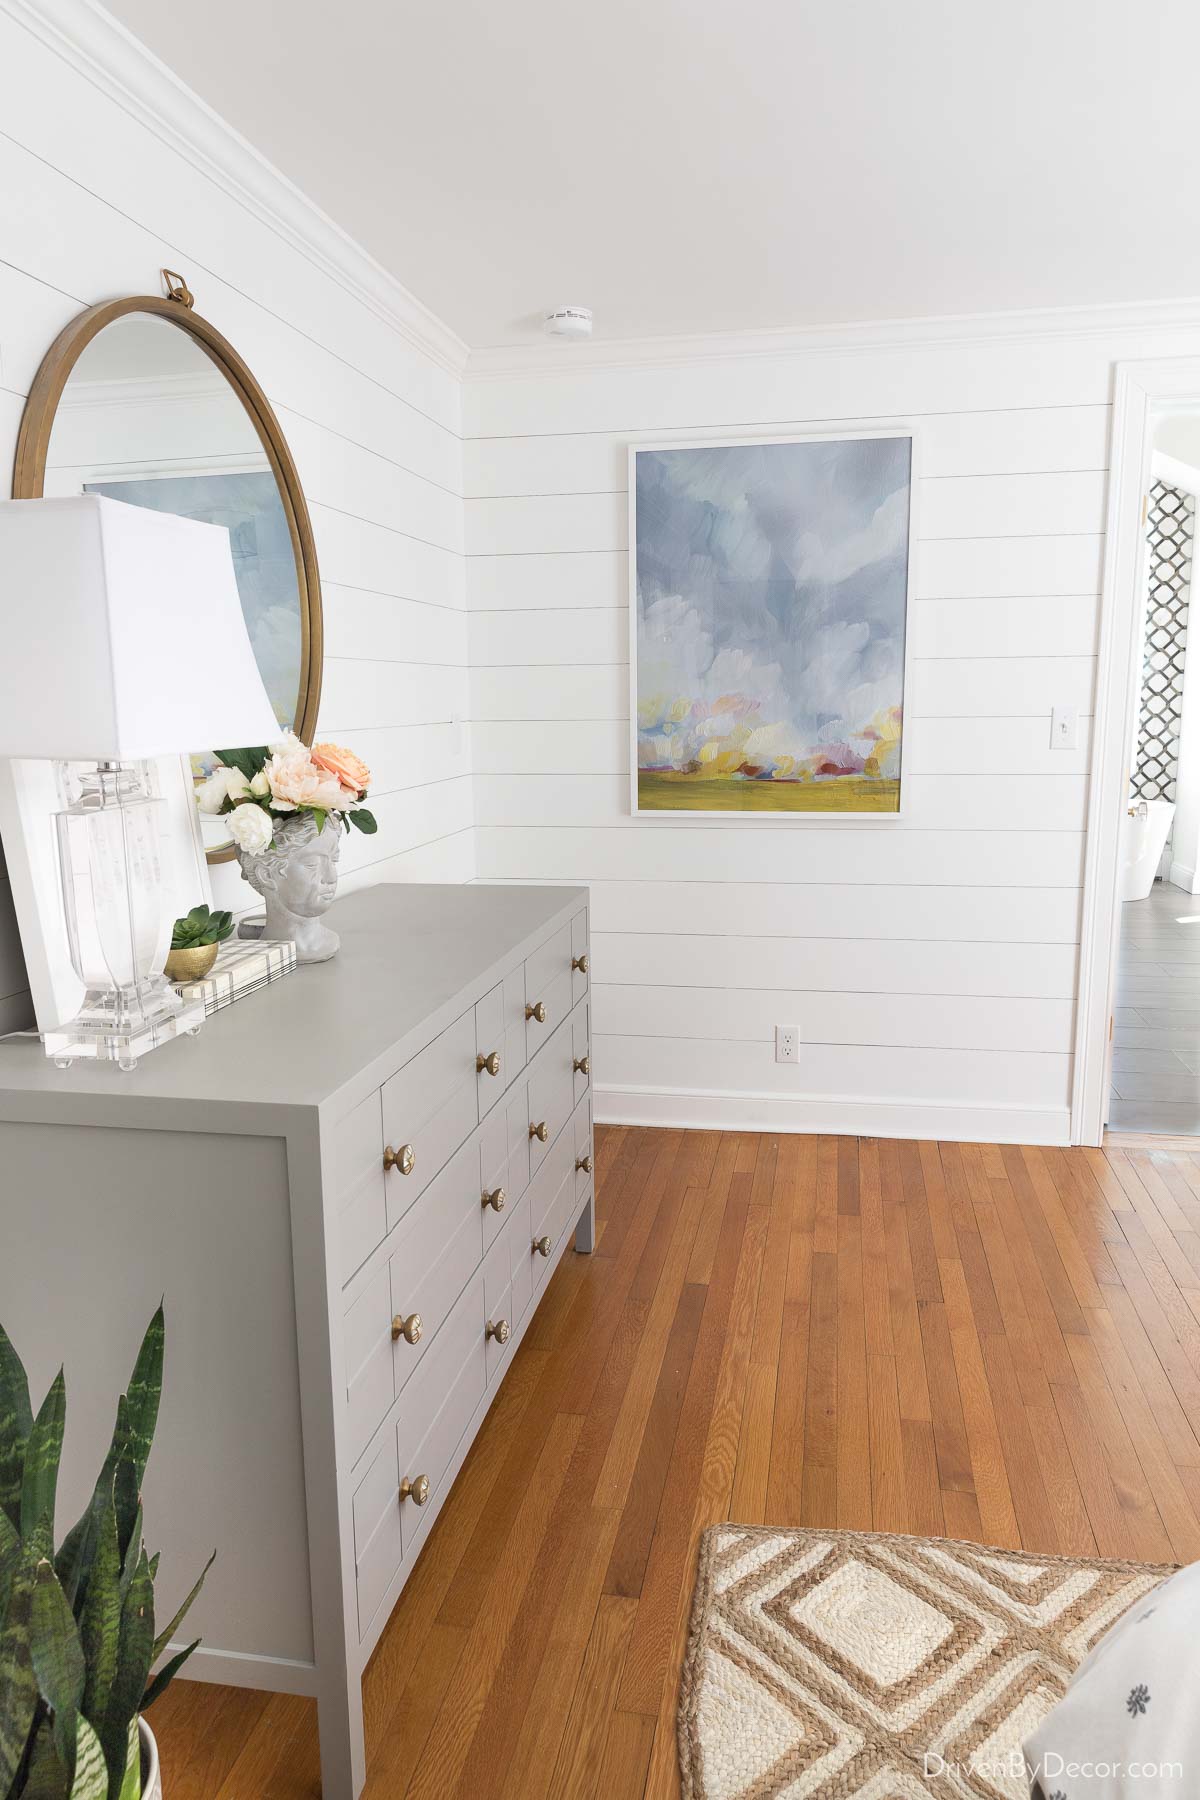 Bedroom with large picture hung on shiplap wall - shows how high to hang a single picture